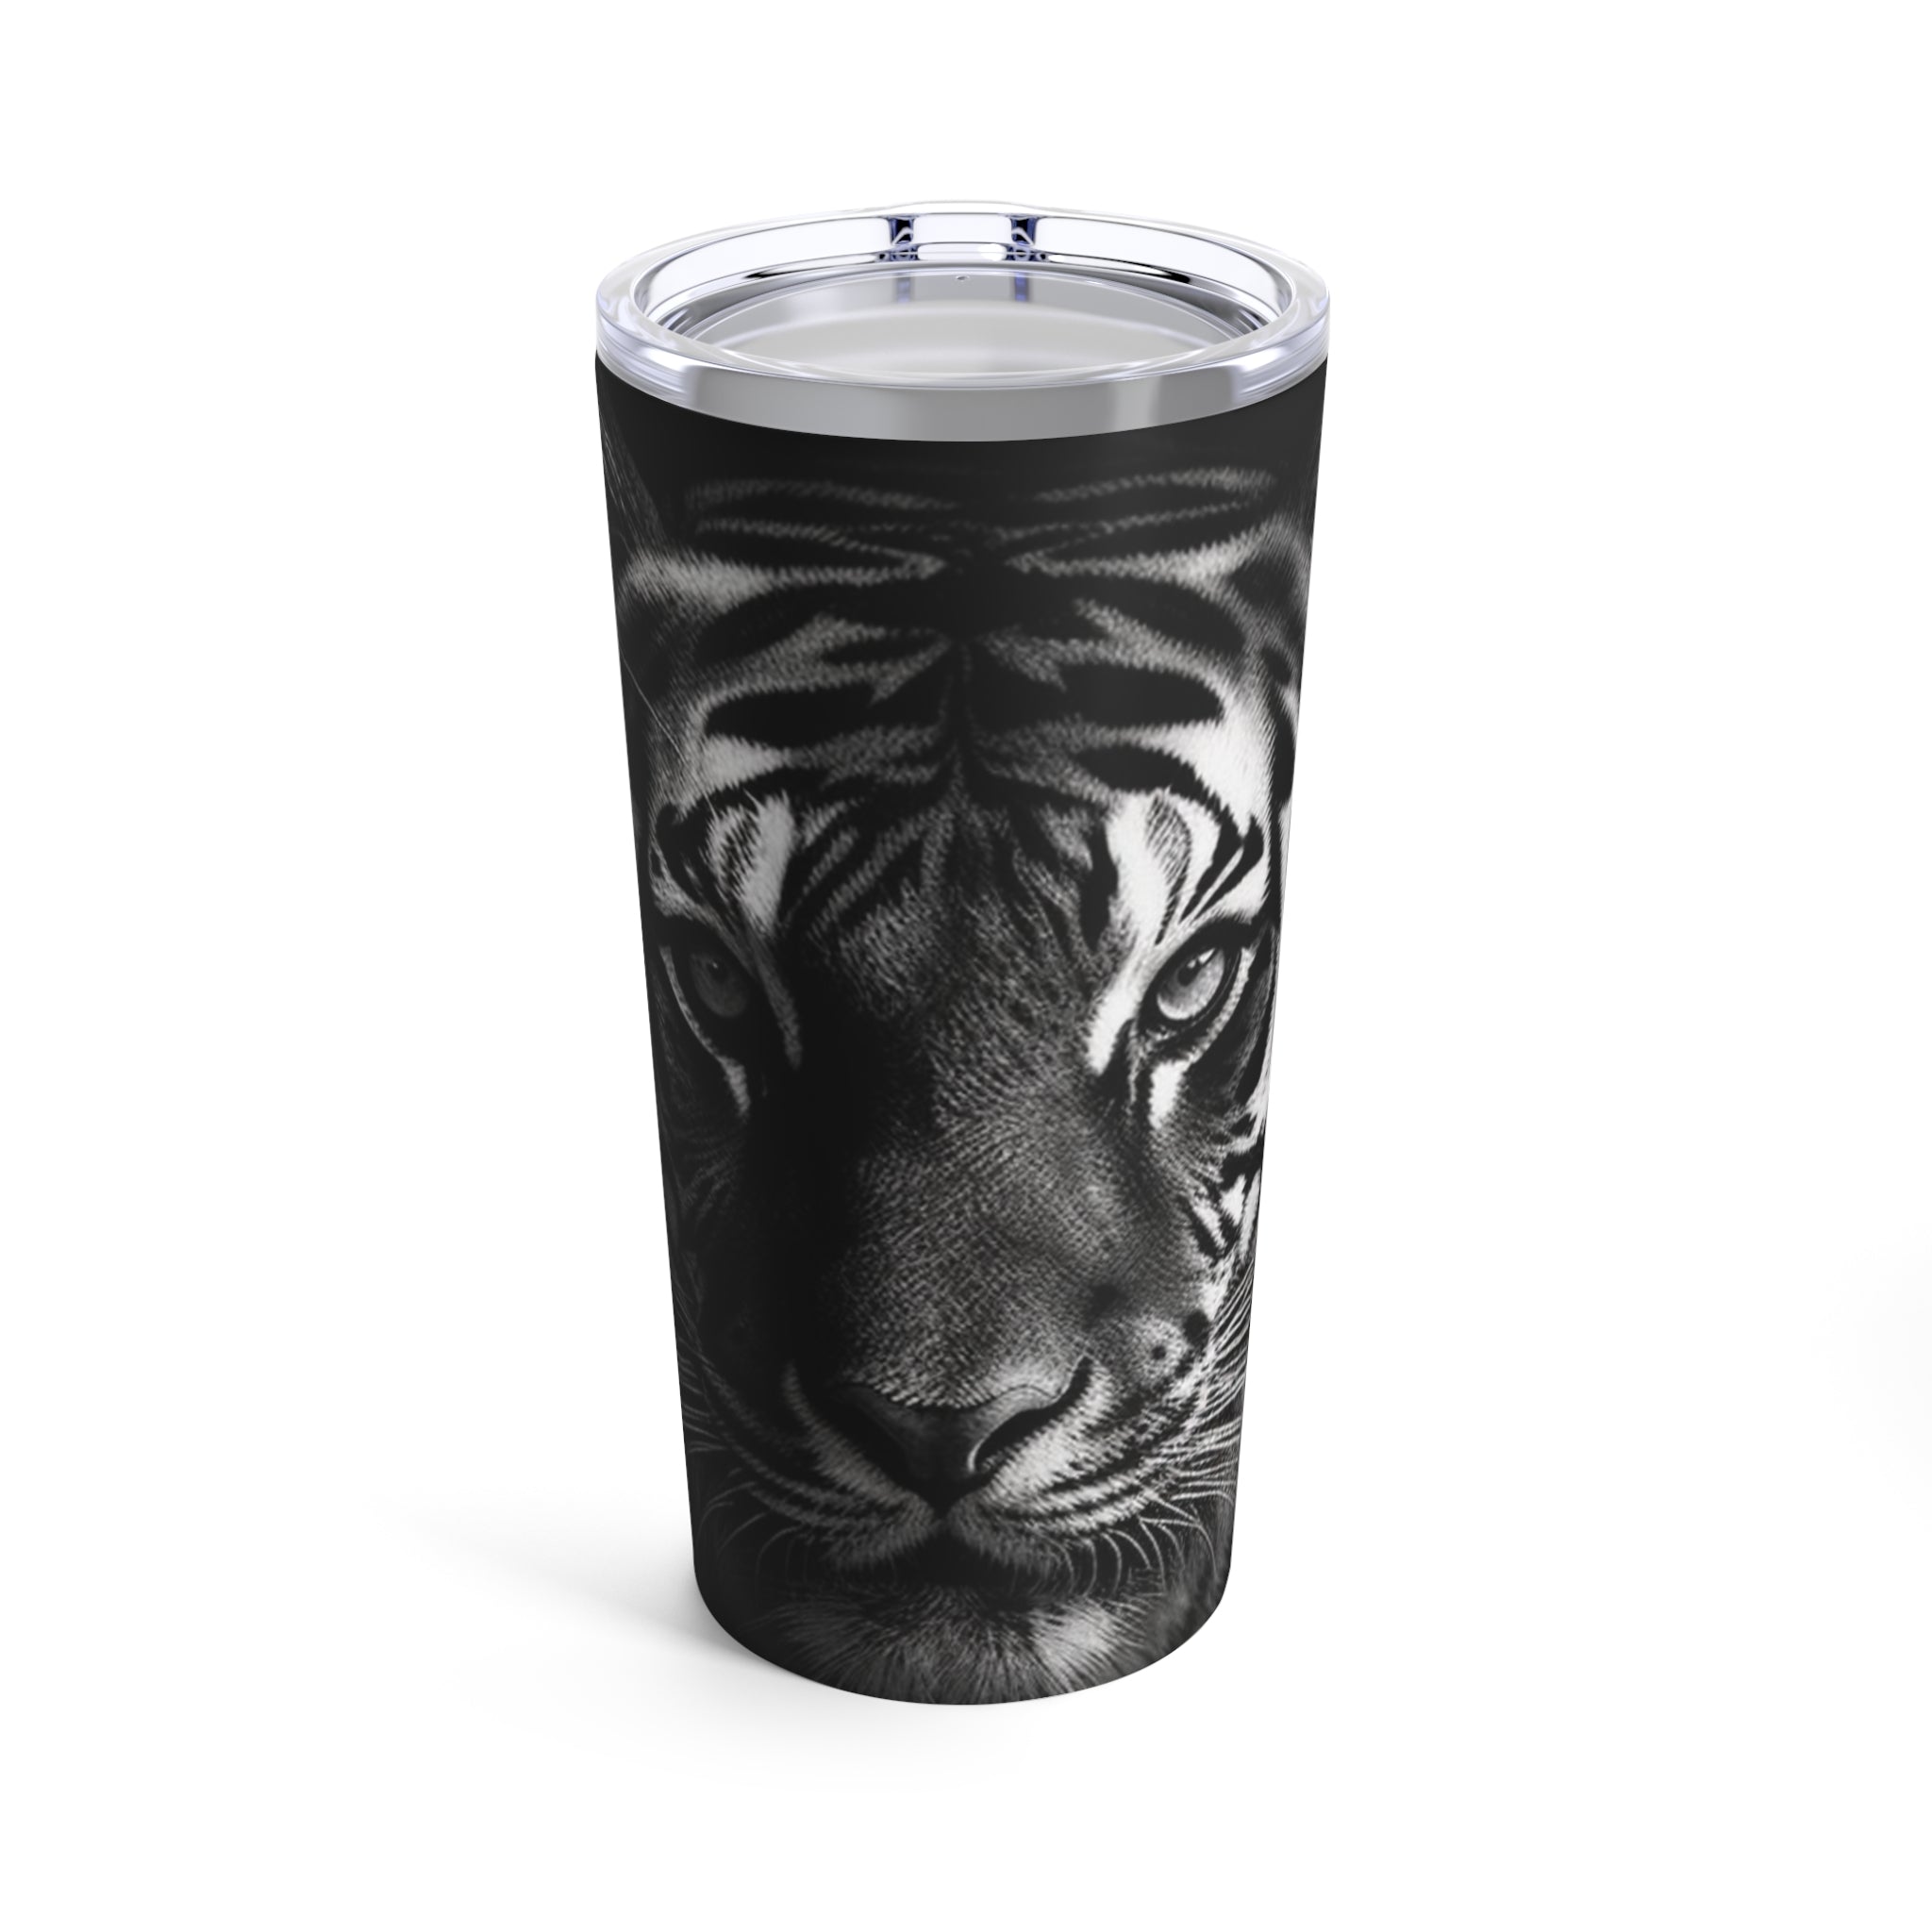 The image features a robust 20oz motivation tumbler, showcasing an awe-inspiring design of a tiger's fierce stare. The tumbler's stainless steel construction is visible, highlighted by the detailed and vibrant artwork that wraps around its surface, designed to inspire and motivate.